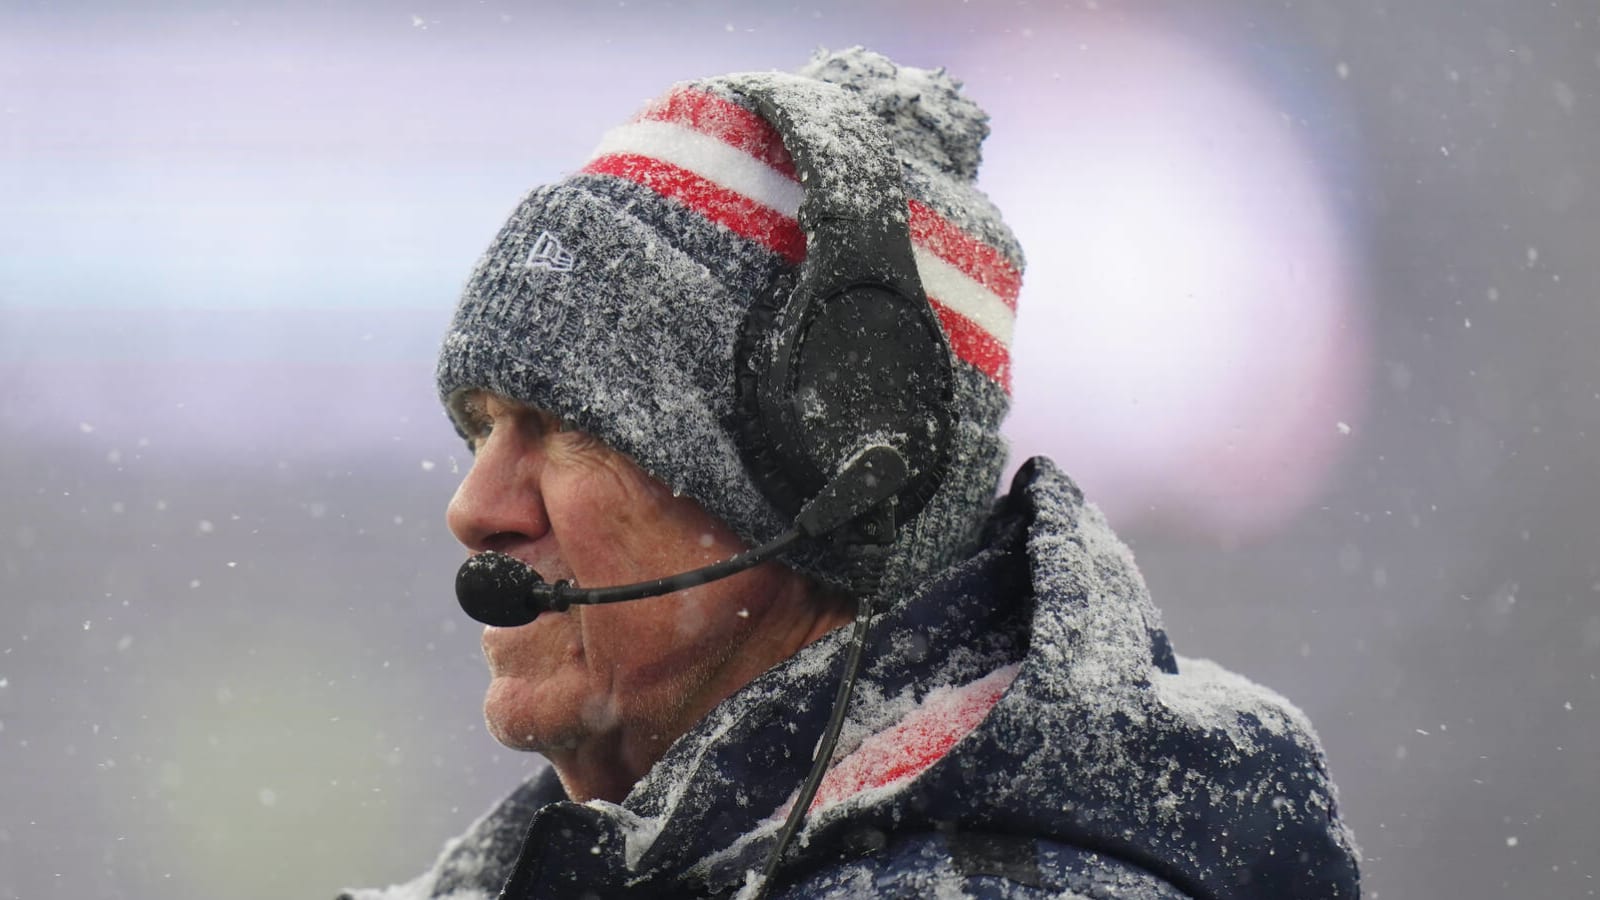 NFC East team could be interested in Bill Belichick